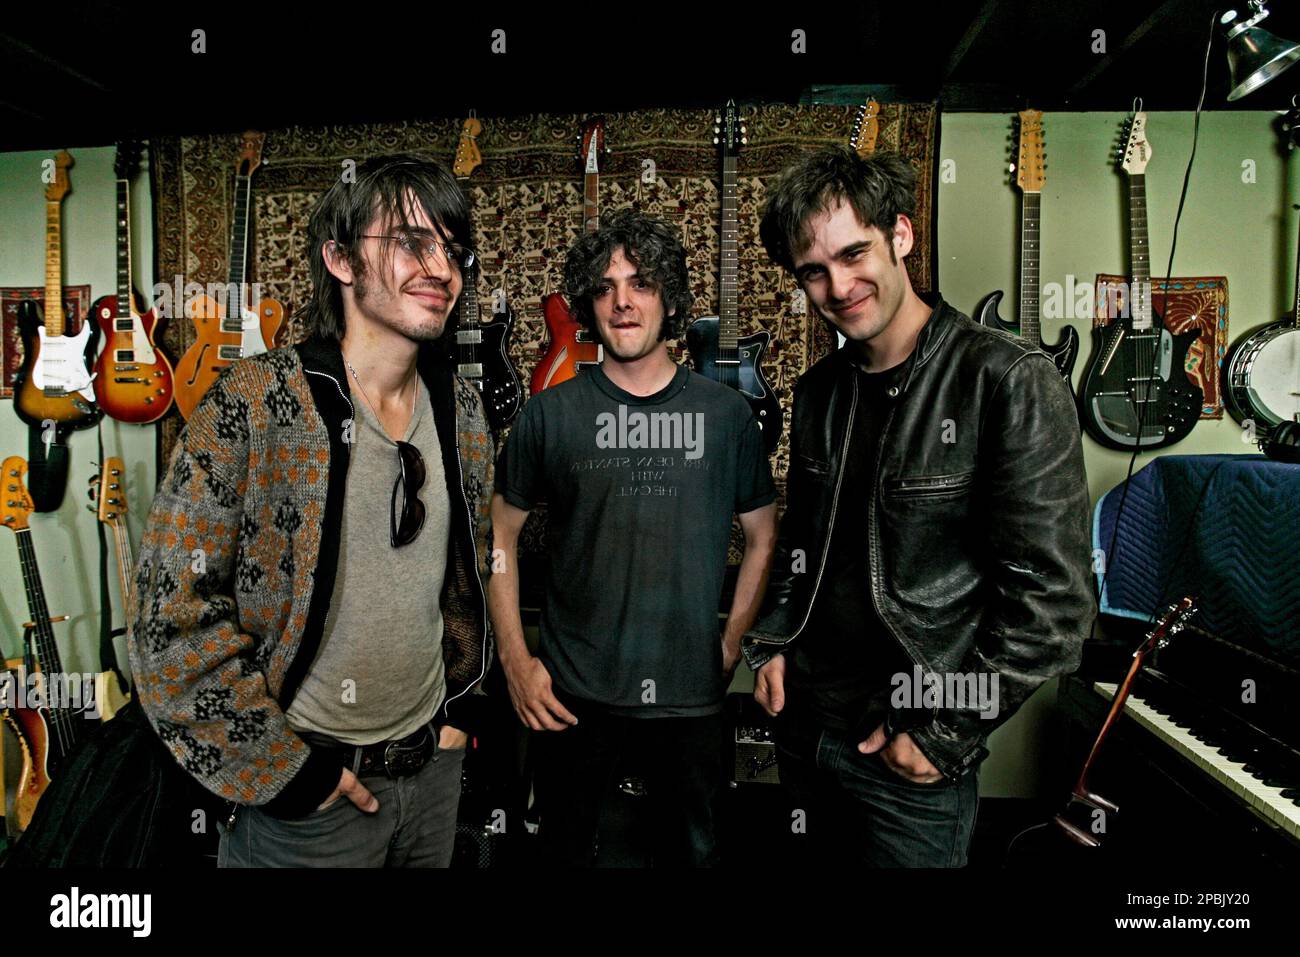 Members of the American rock and roll band Black Rebel Motorcycle Club  (BRMC) from San Francisco, Calif., now based in Los Angeles, pose for a  photo at the Sandbox sound studio in